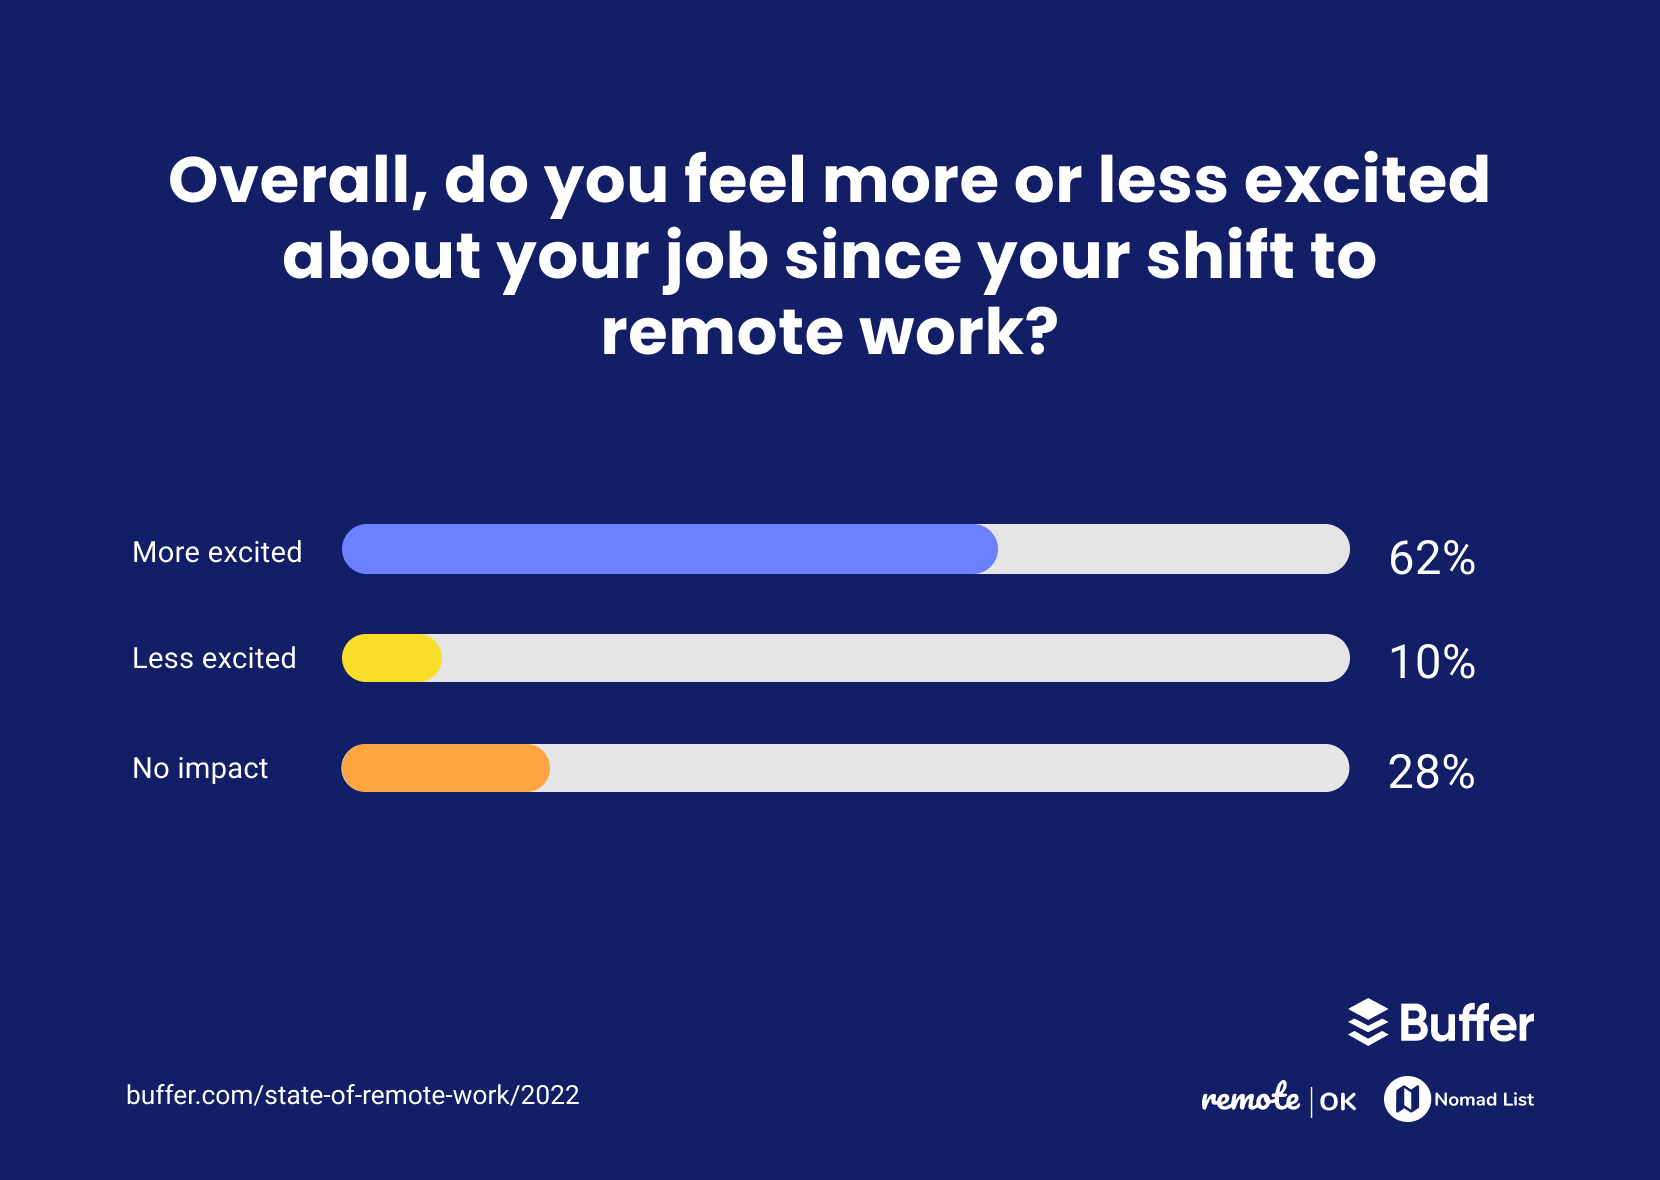 Overall, do you feel more or less excited about your job since your shift to remote work?